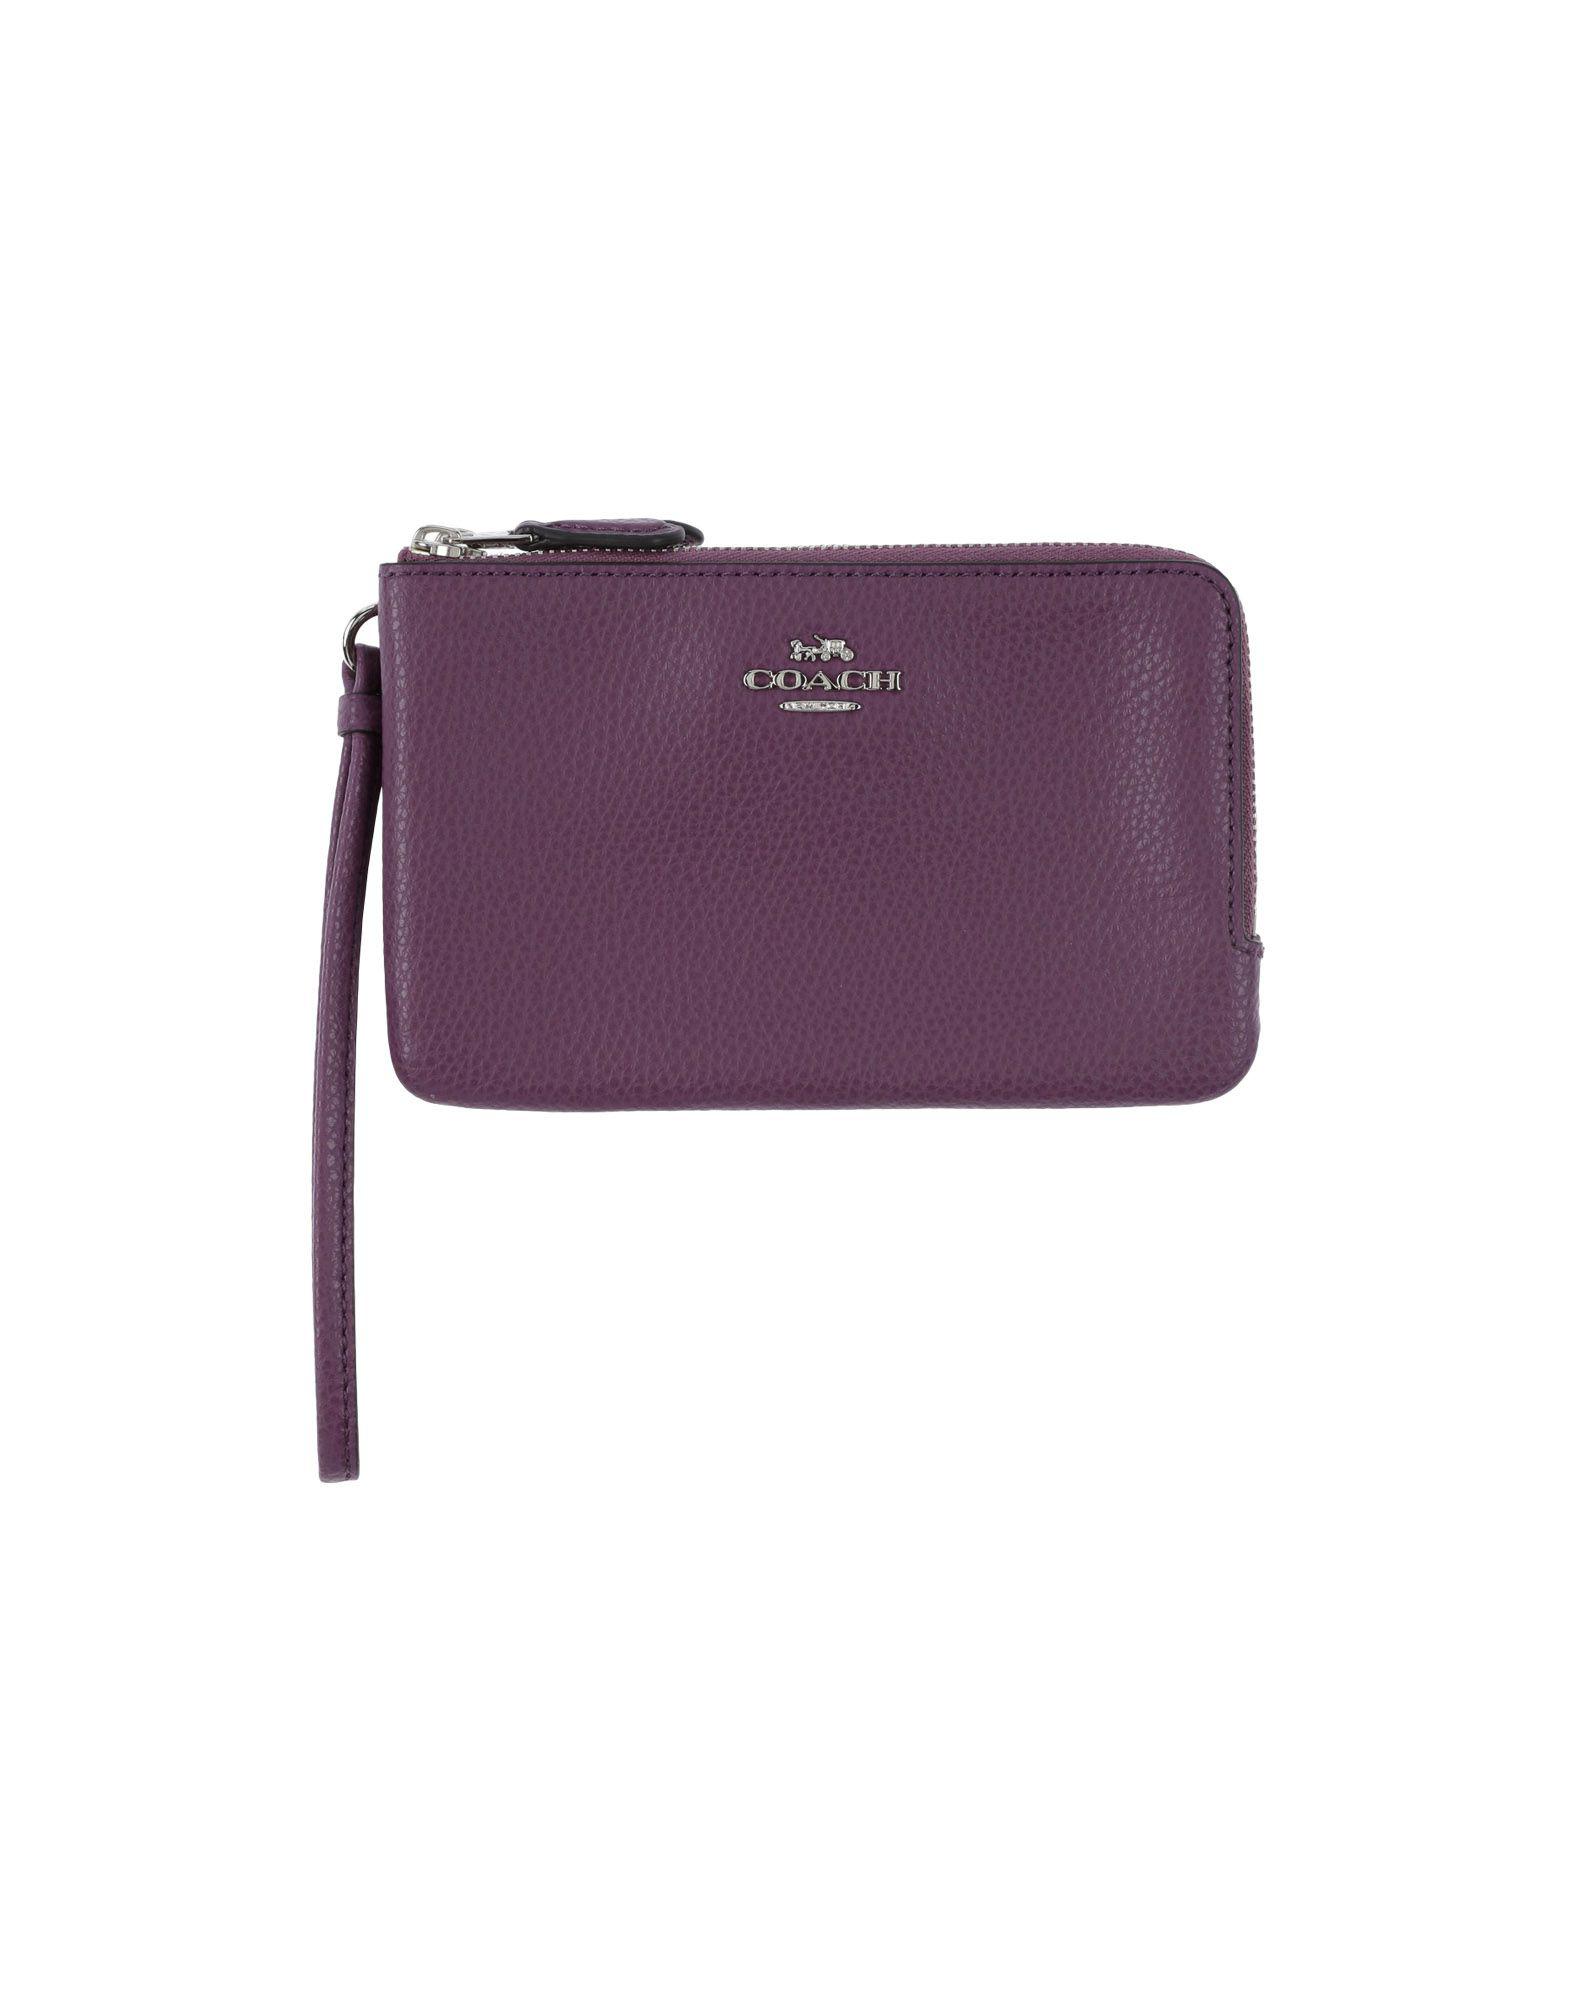 Aspinal of London Purple Croc Embossed Leather Zip Around Compact Wallet  Aspinal Of London | TLC